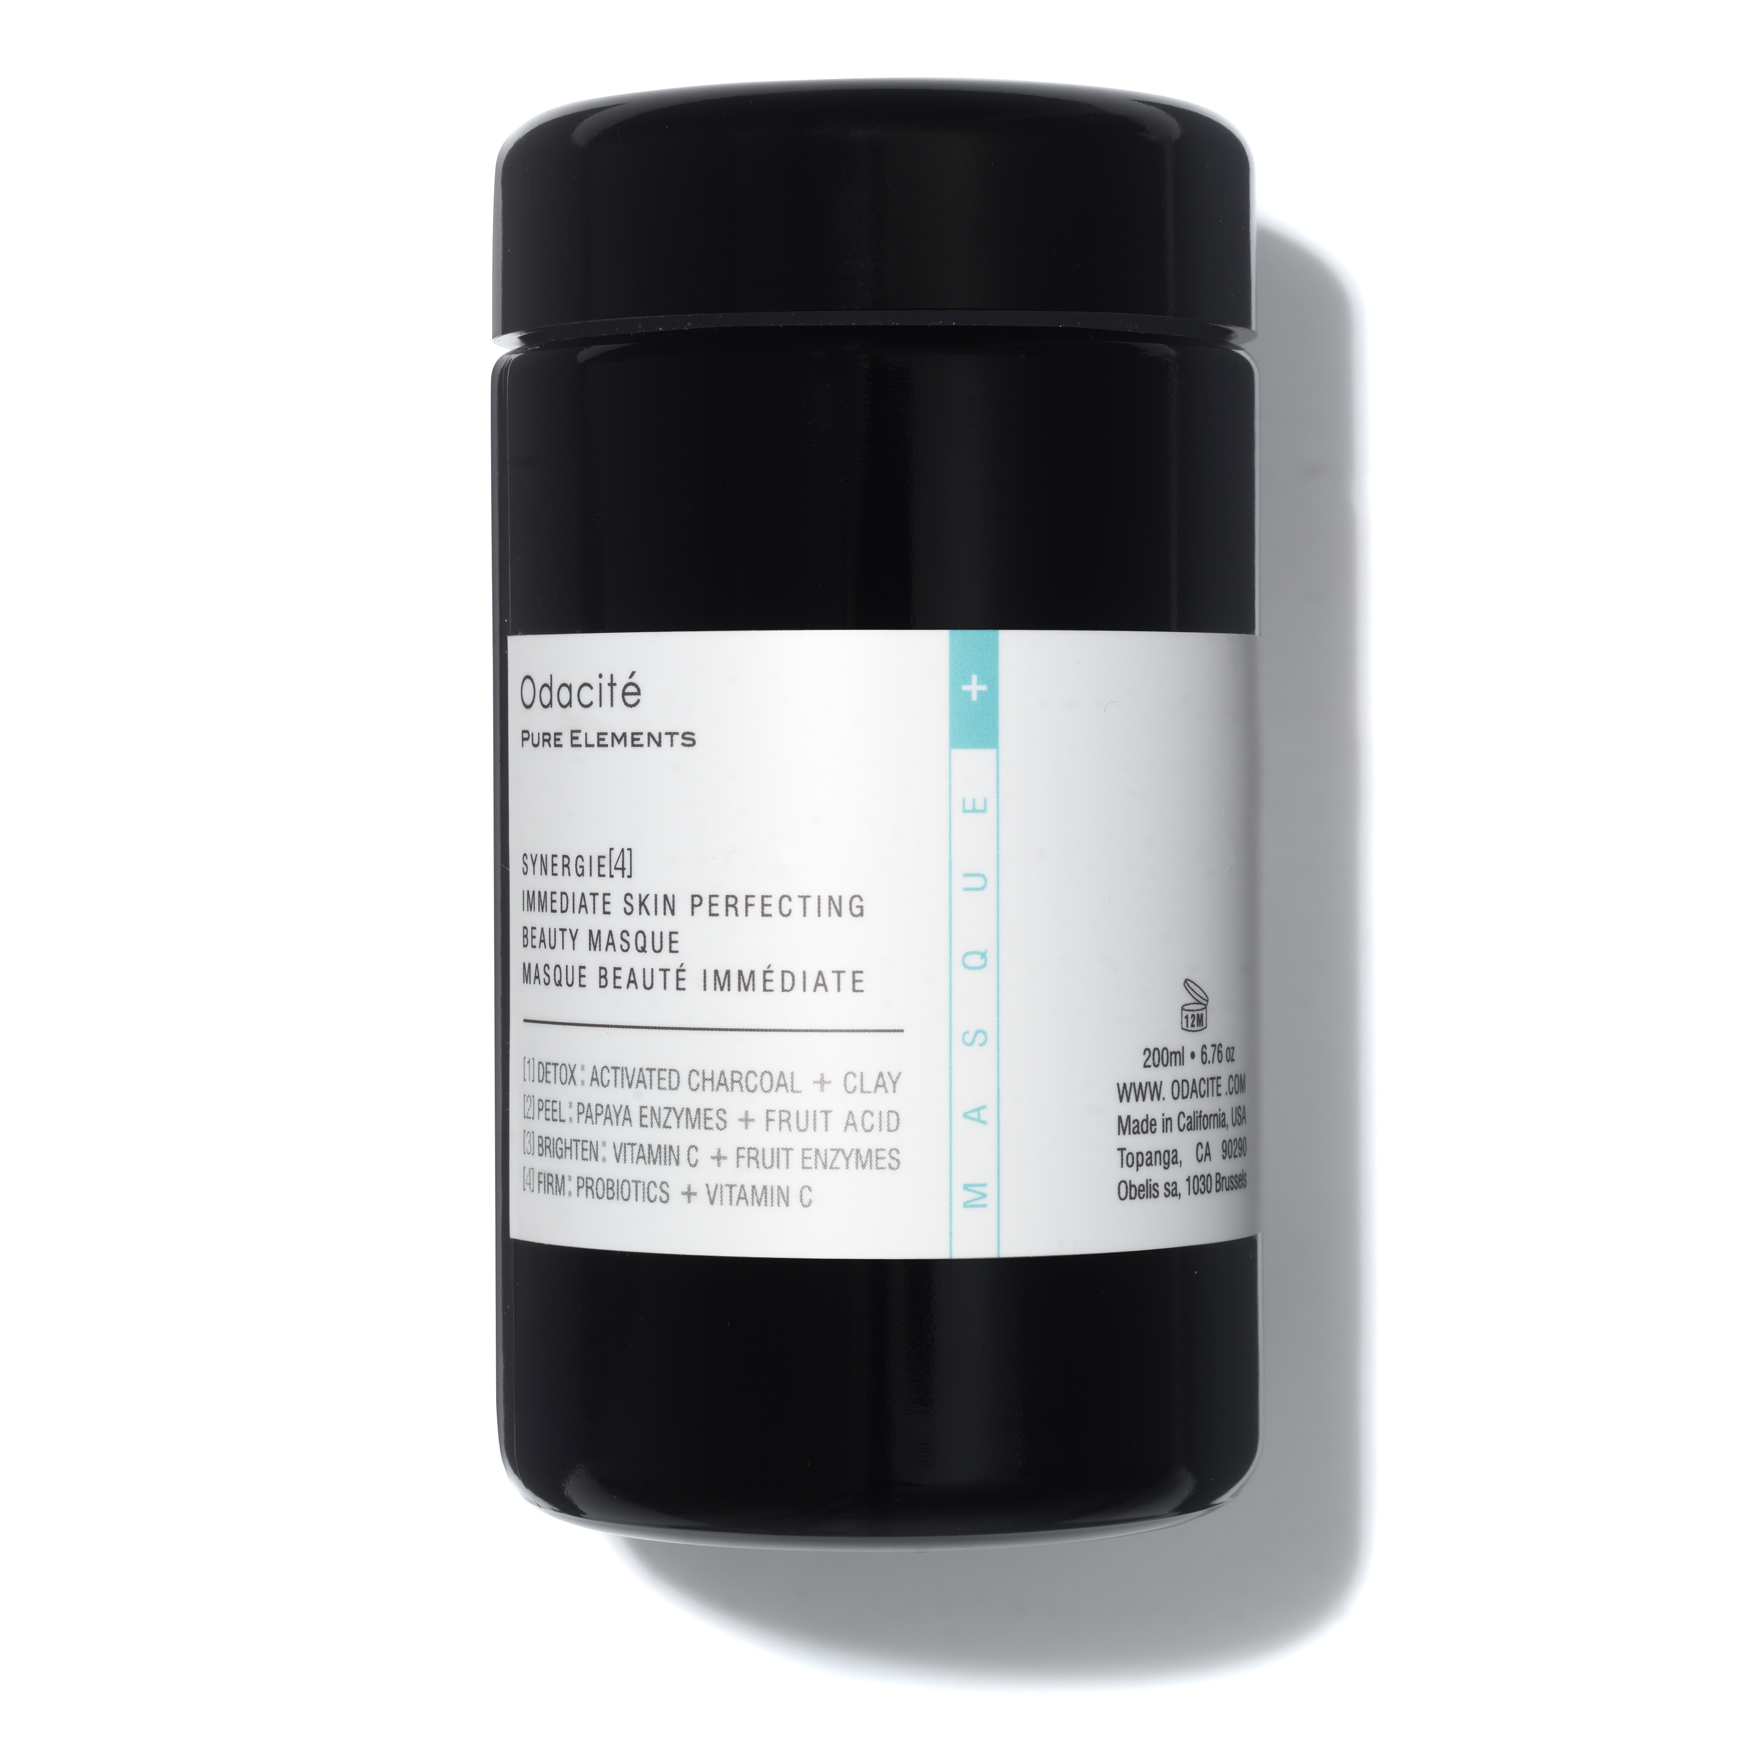 Odacité Synergie[4] Immediate Skin Perfecting Beauty Masque | Space NK